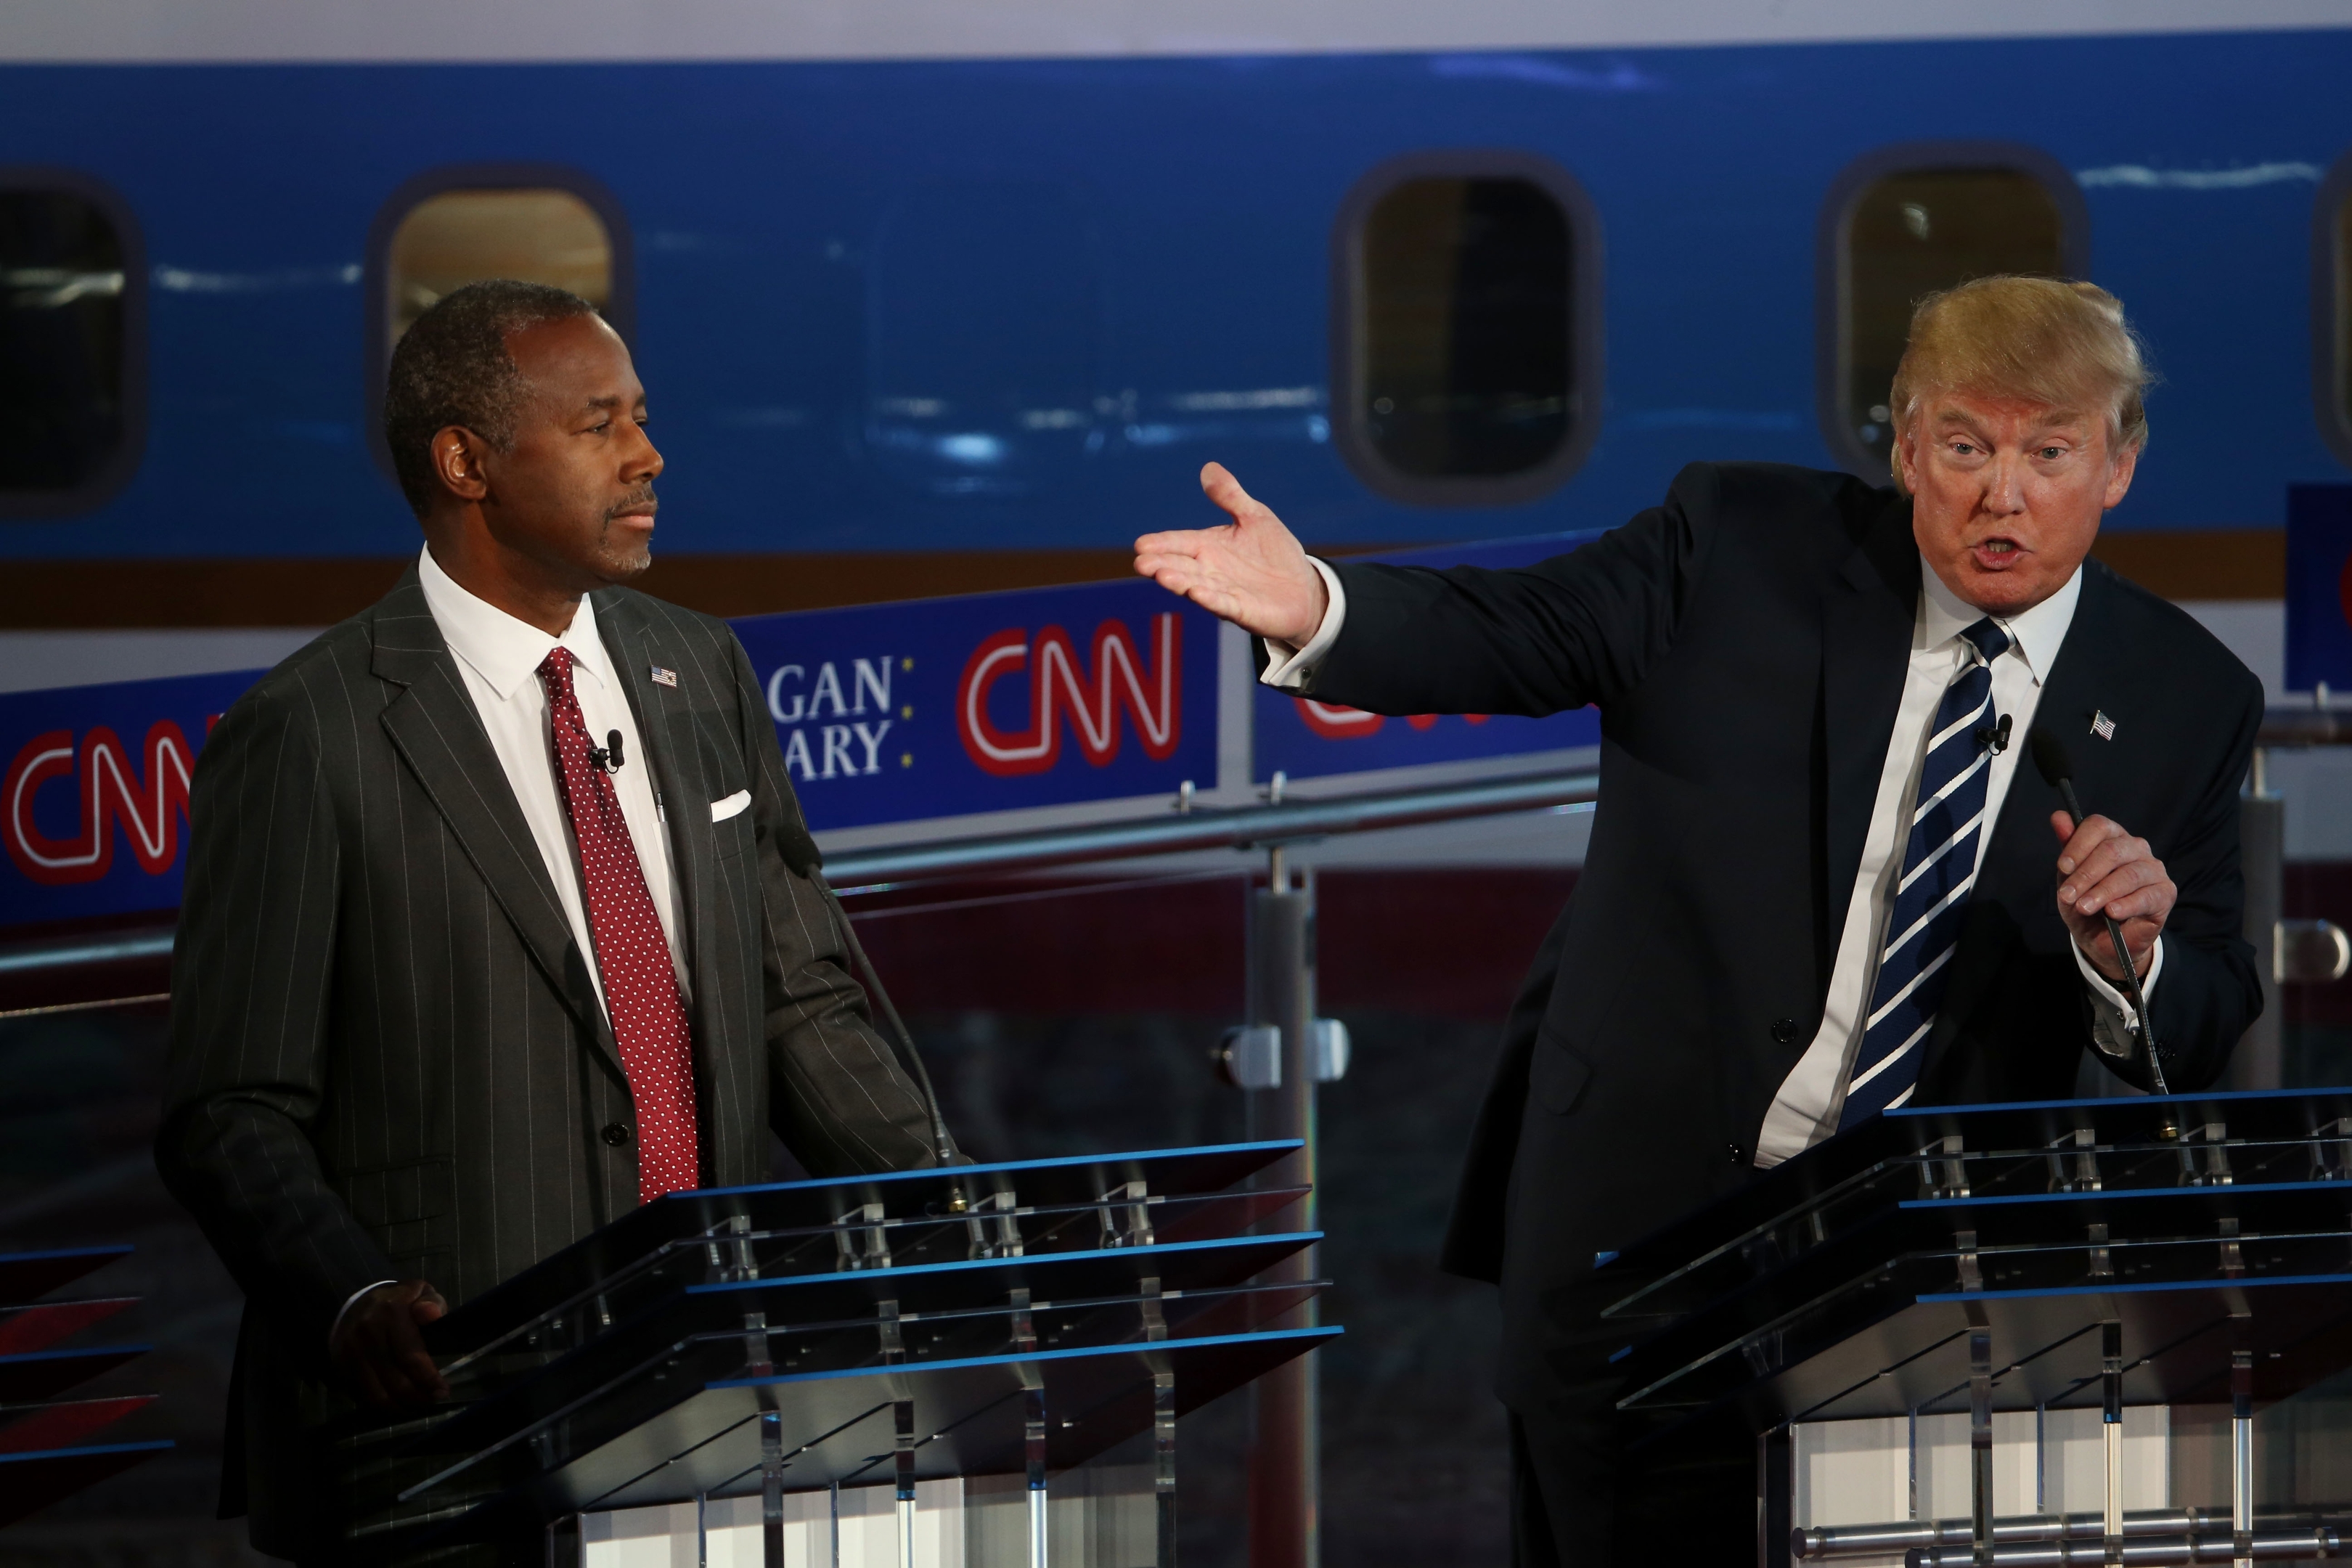 Republican presidential candidates Donald Trump and Ben Carson take part in the presidential debates at the Reagan Library on September 16, 2015 in Simi Valley, California. Fifteen Republican presidential candidates are participating in the second set of Republican presidential debates. 